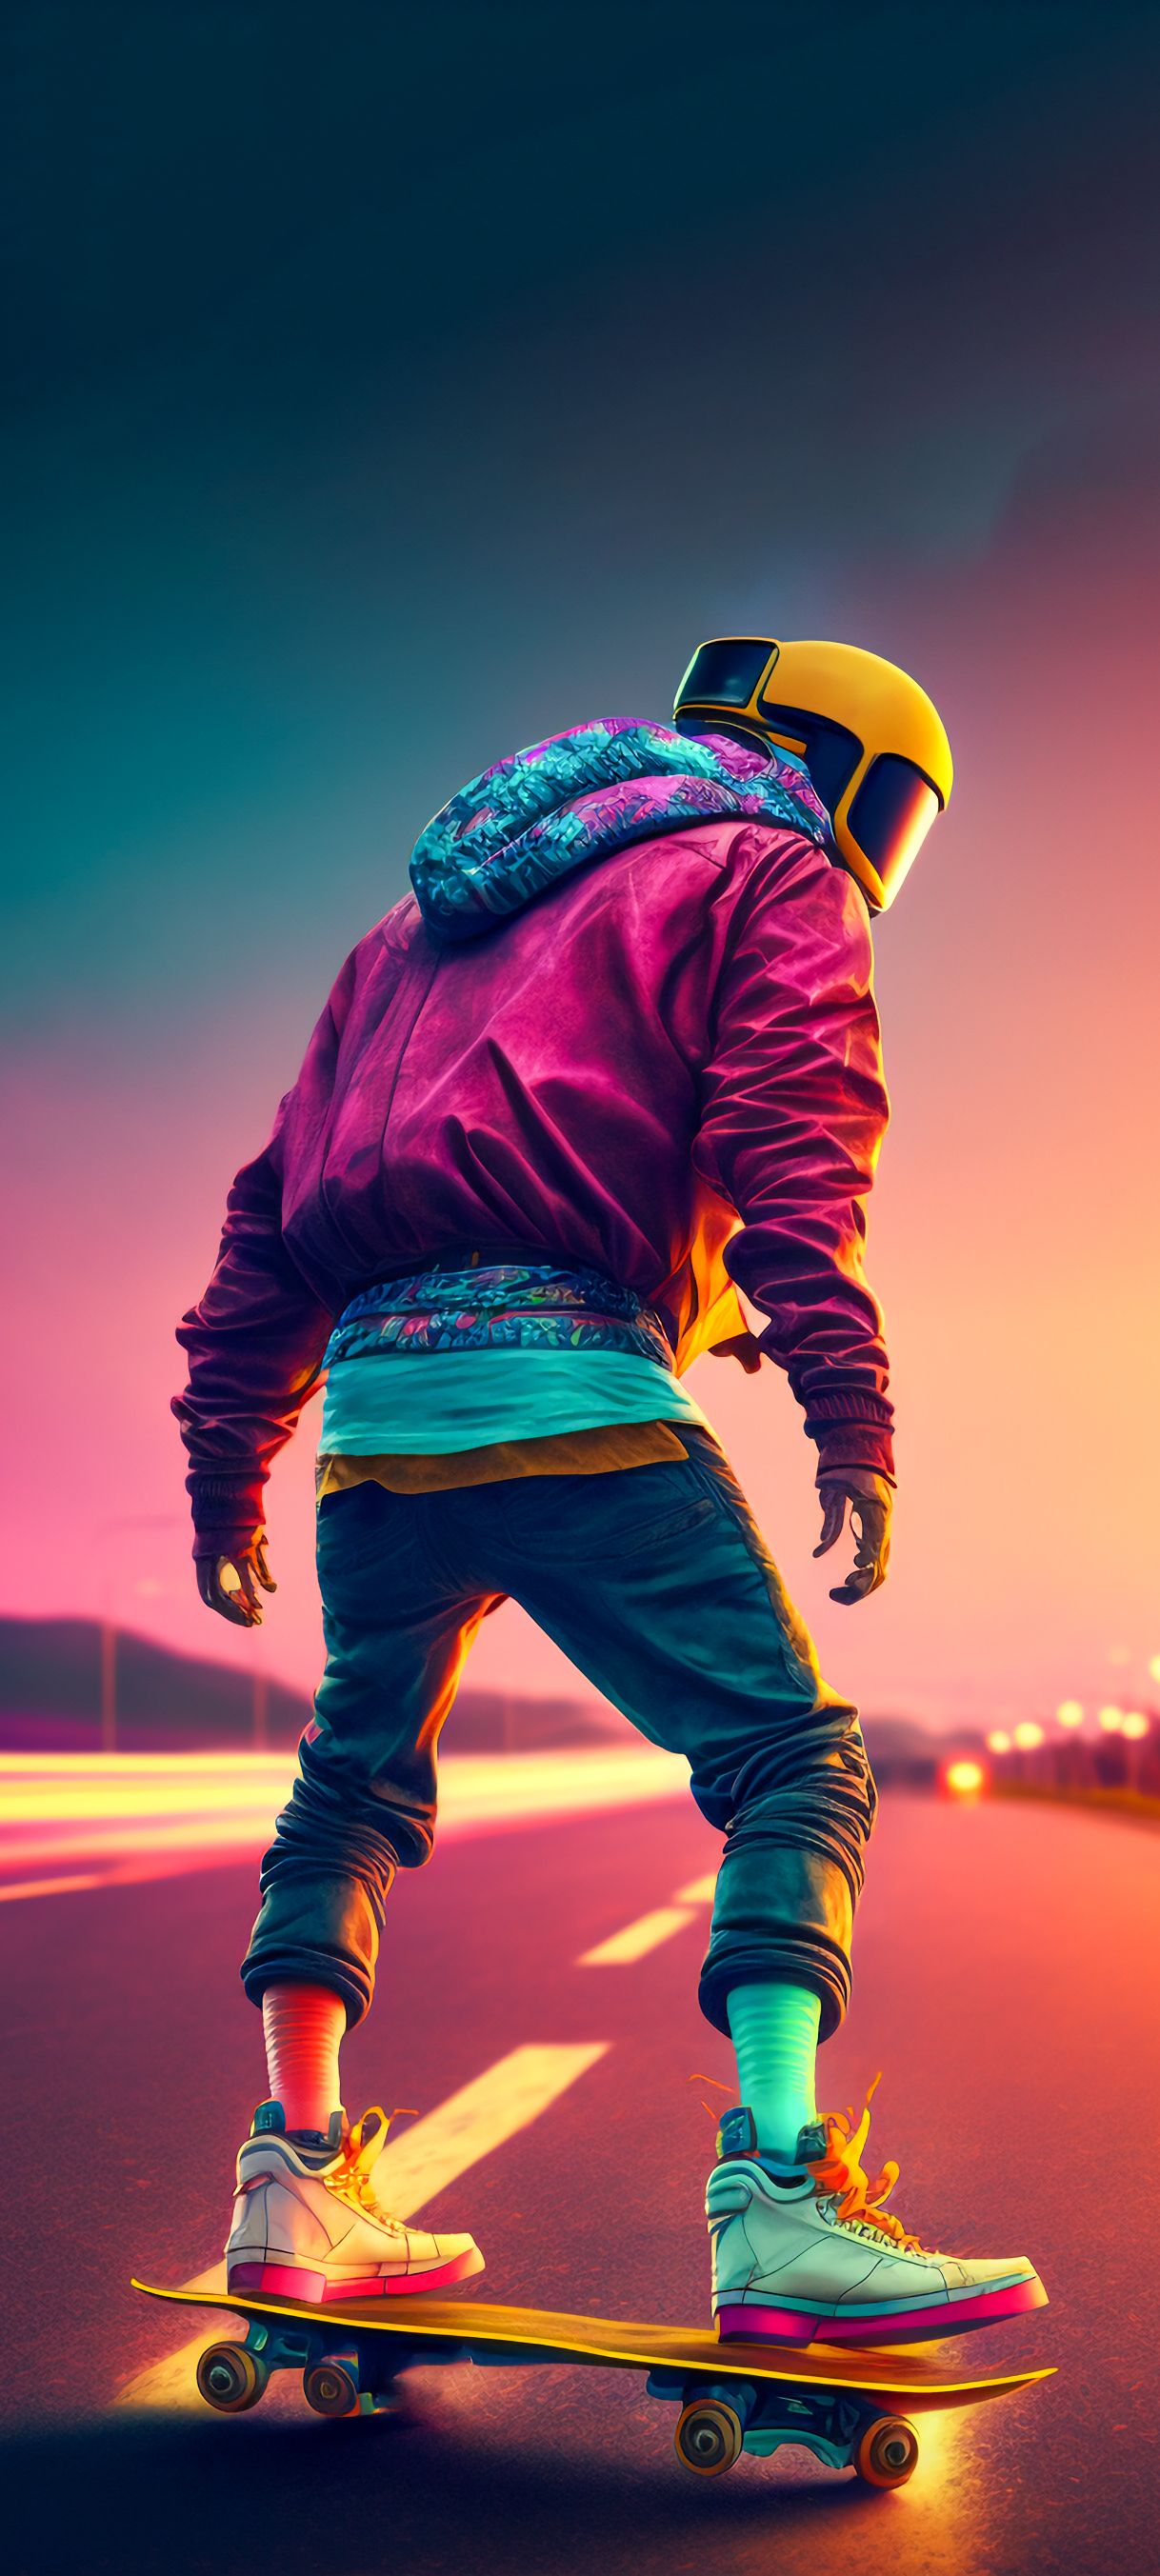 A man on skateboard with neon colors - Skate